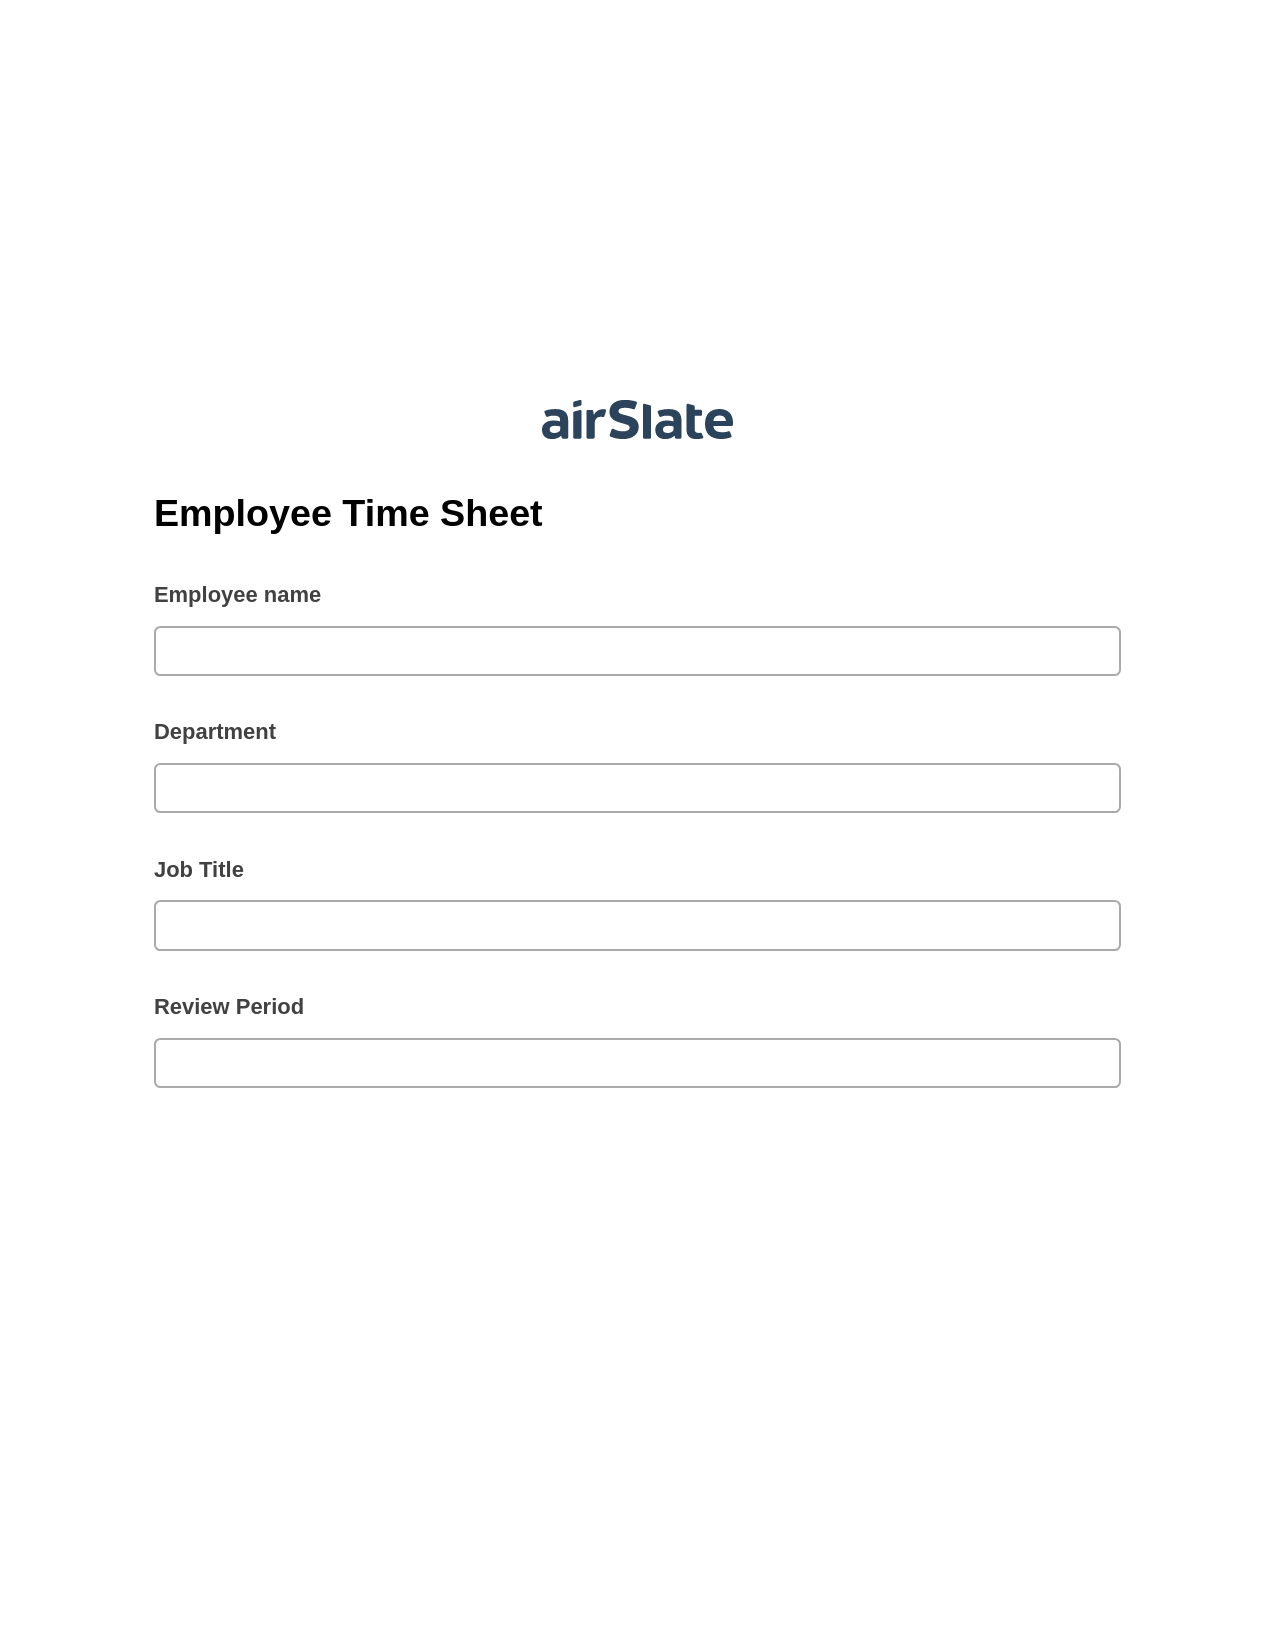 Employee Time Sheet Pre-fill from Salesforce Records Bot, Create Salesforce Records Bot, Post-finish Document Bot